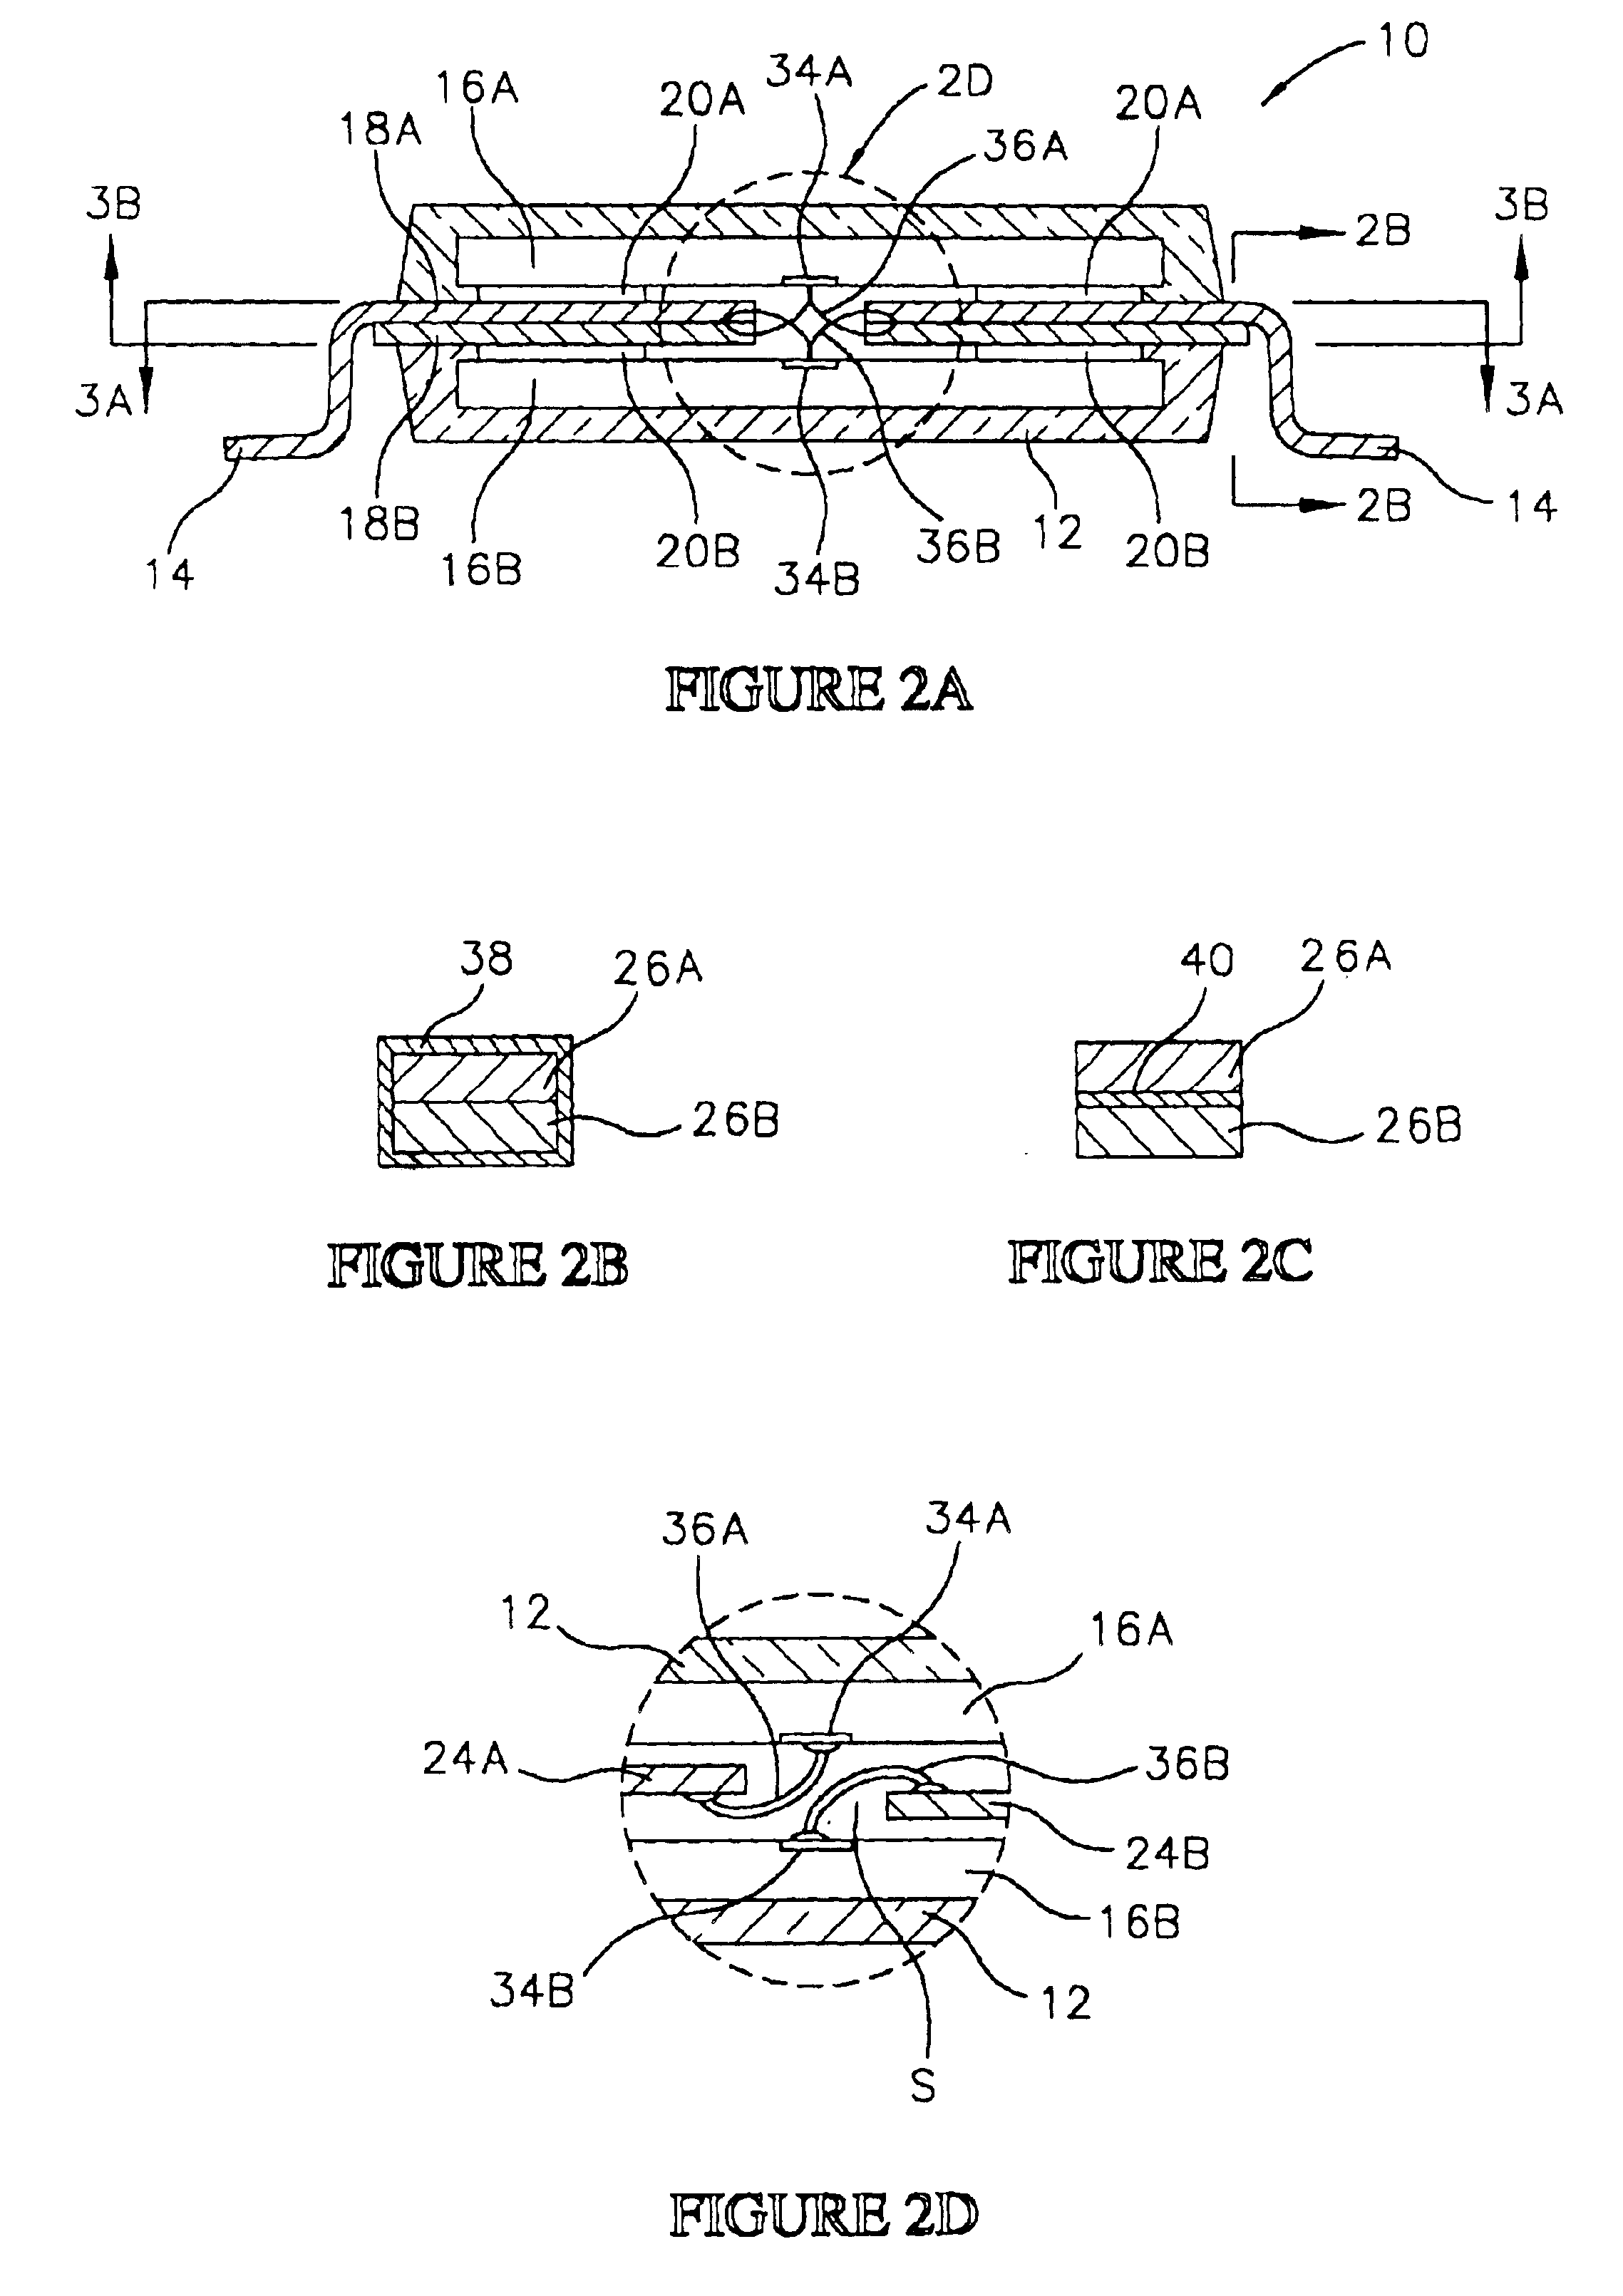 Method for fabricating semiconductor packages with stacked dice and leadframes